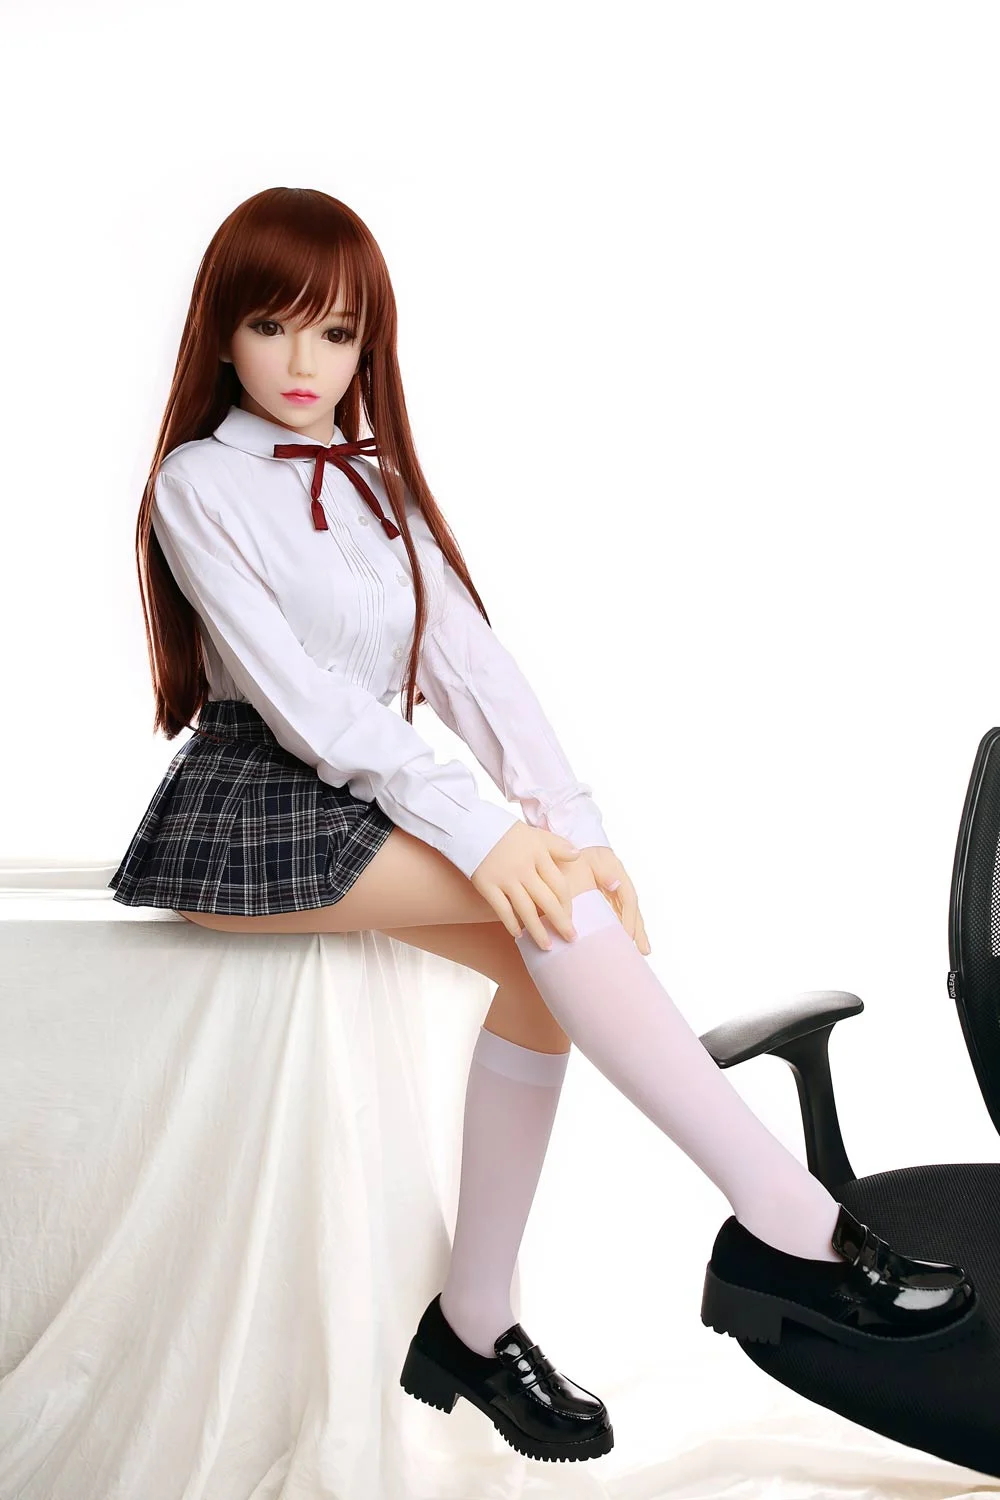 Mini sex doll with white stockings with both hands